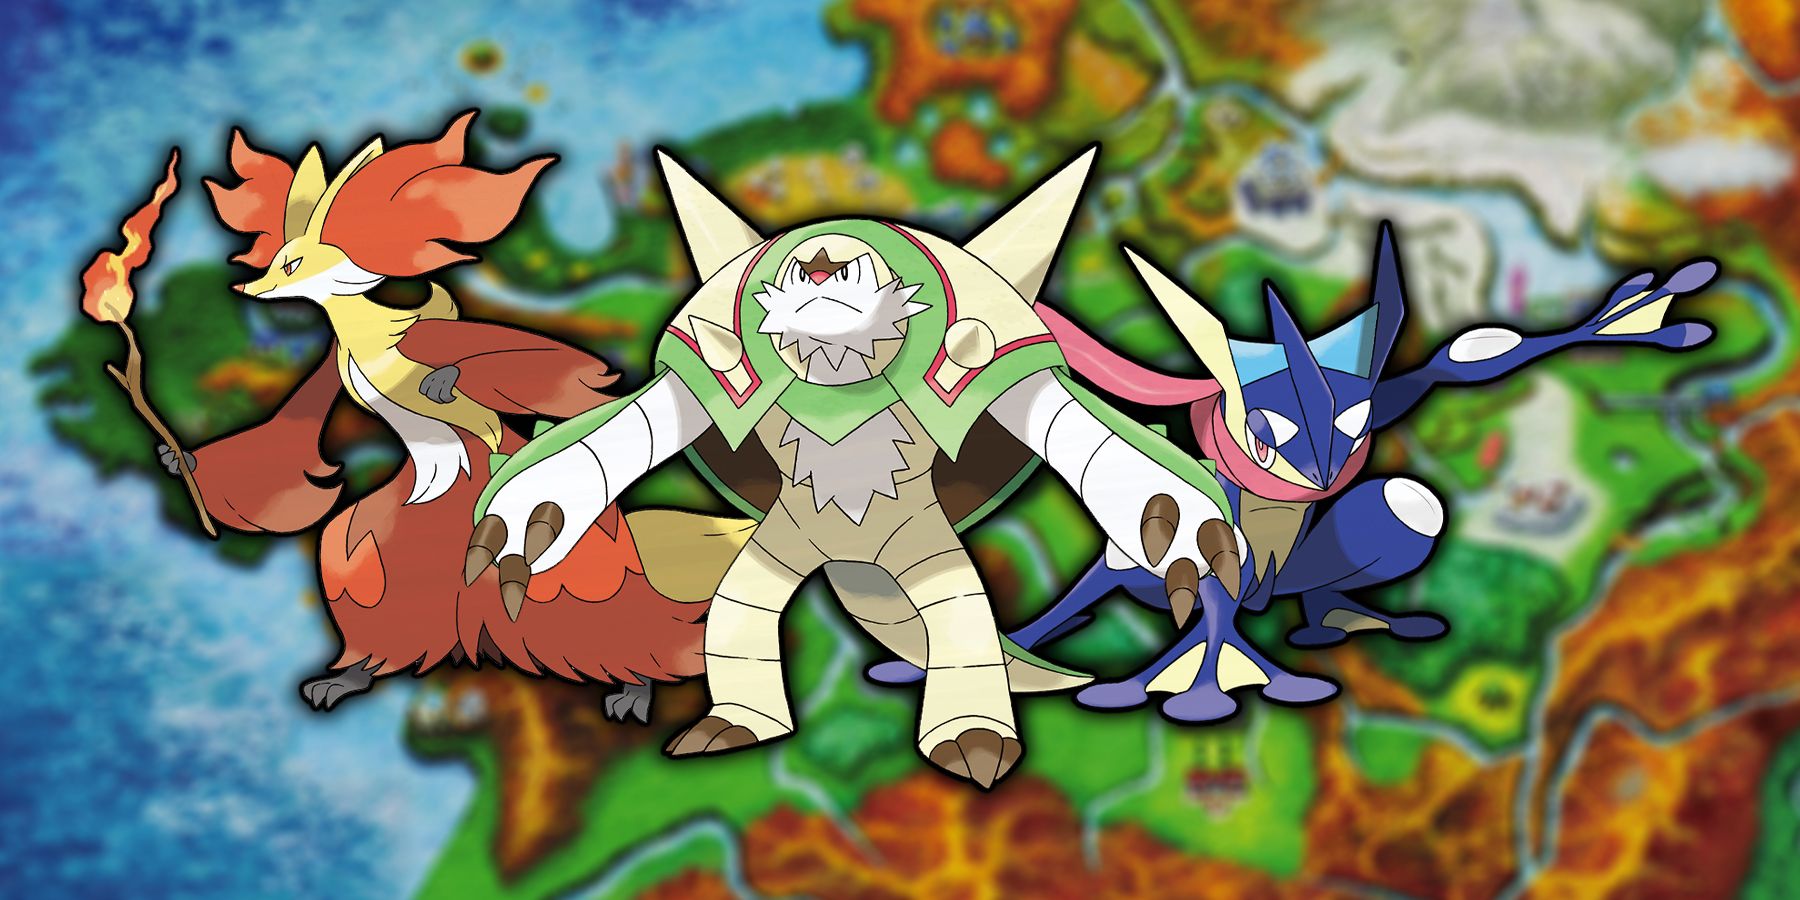 Delphox, Chesnaught, and Greninja from Pokemon X and Y with a map of the Kalos region in the background.